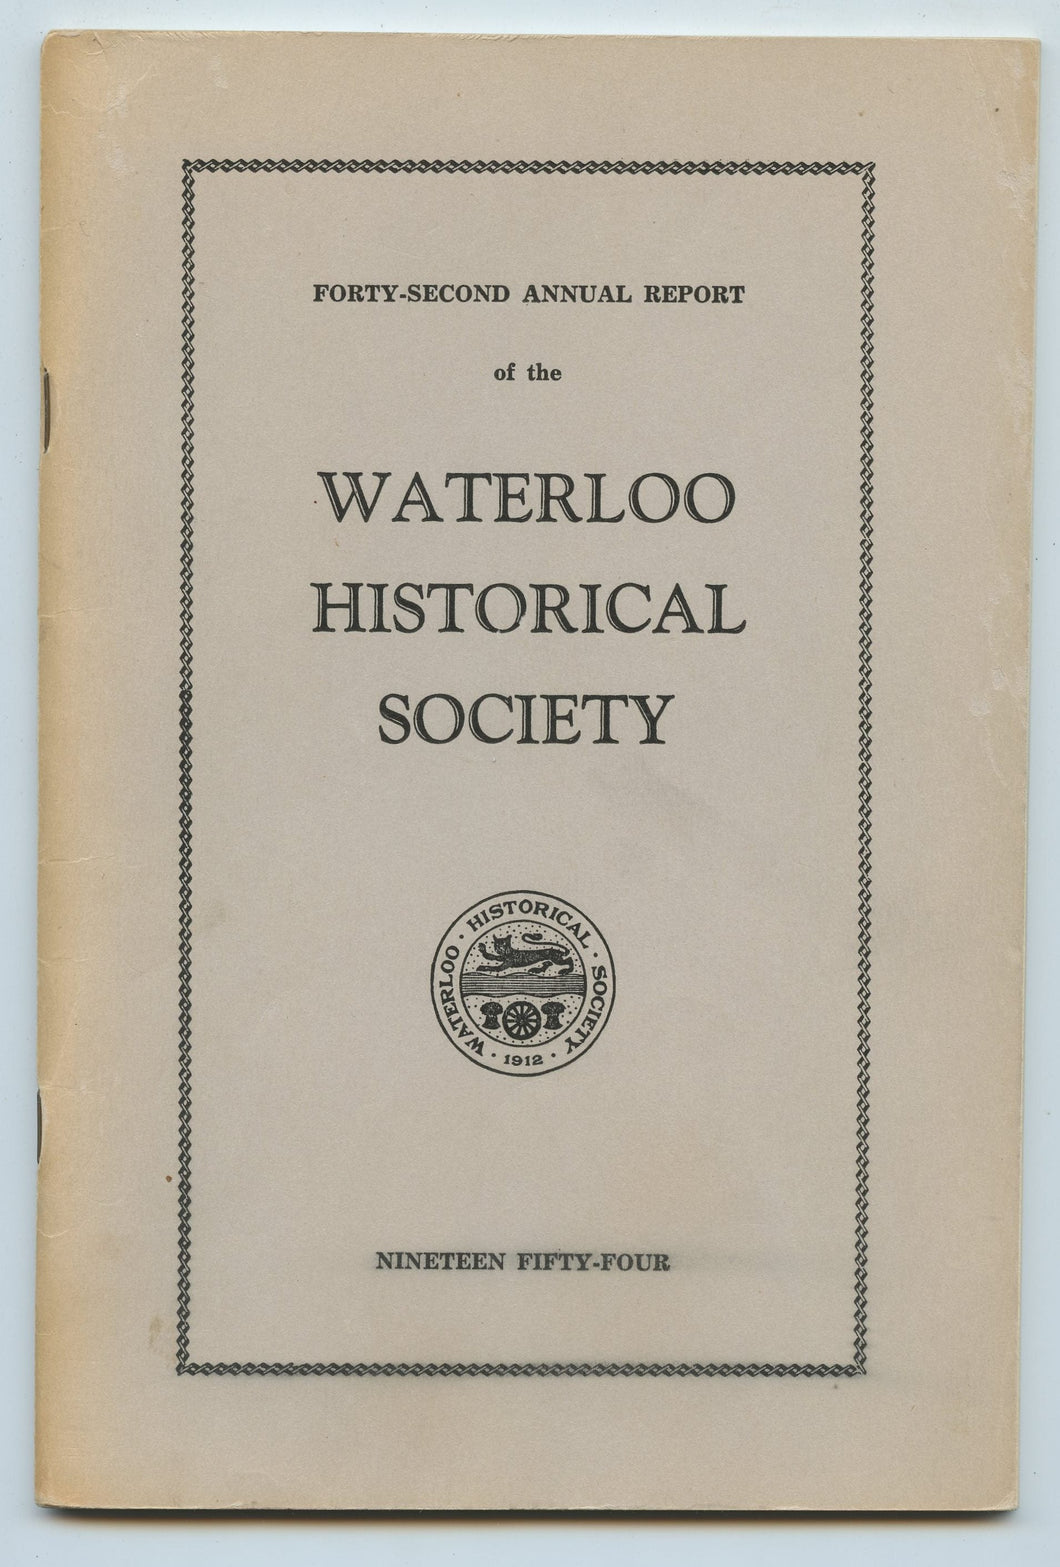 Forty-second Annual Report of the Waterloo Historical Society 1954